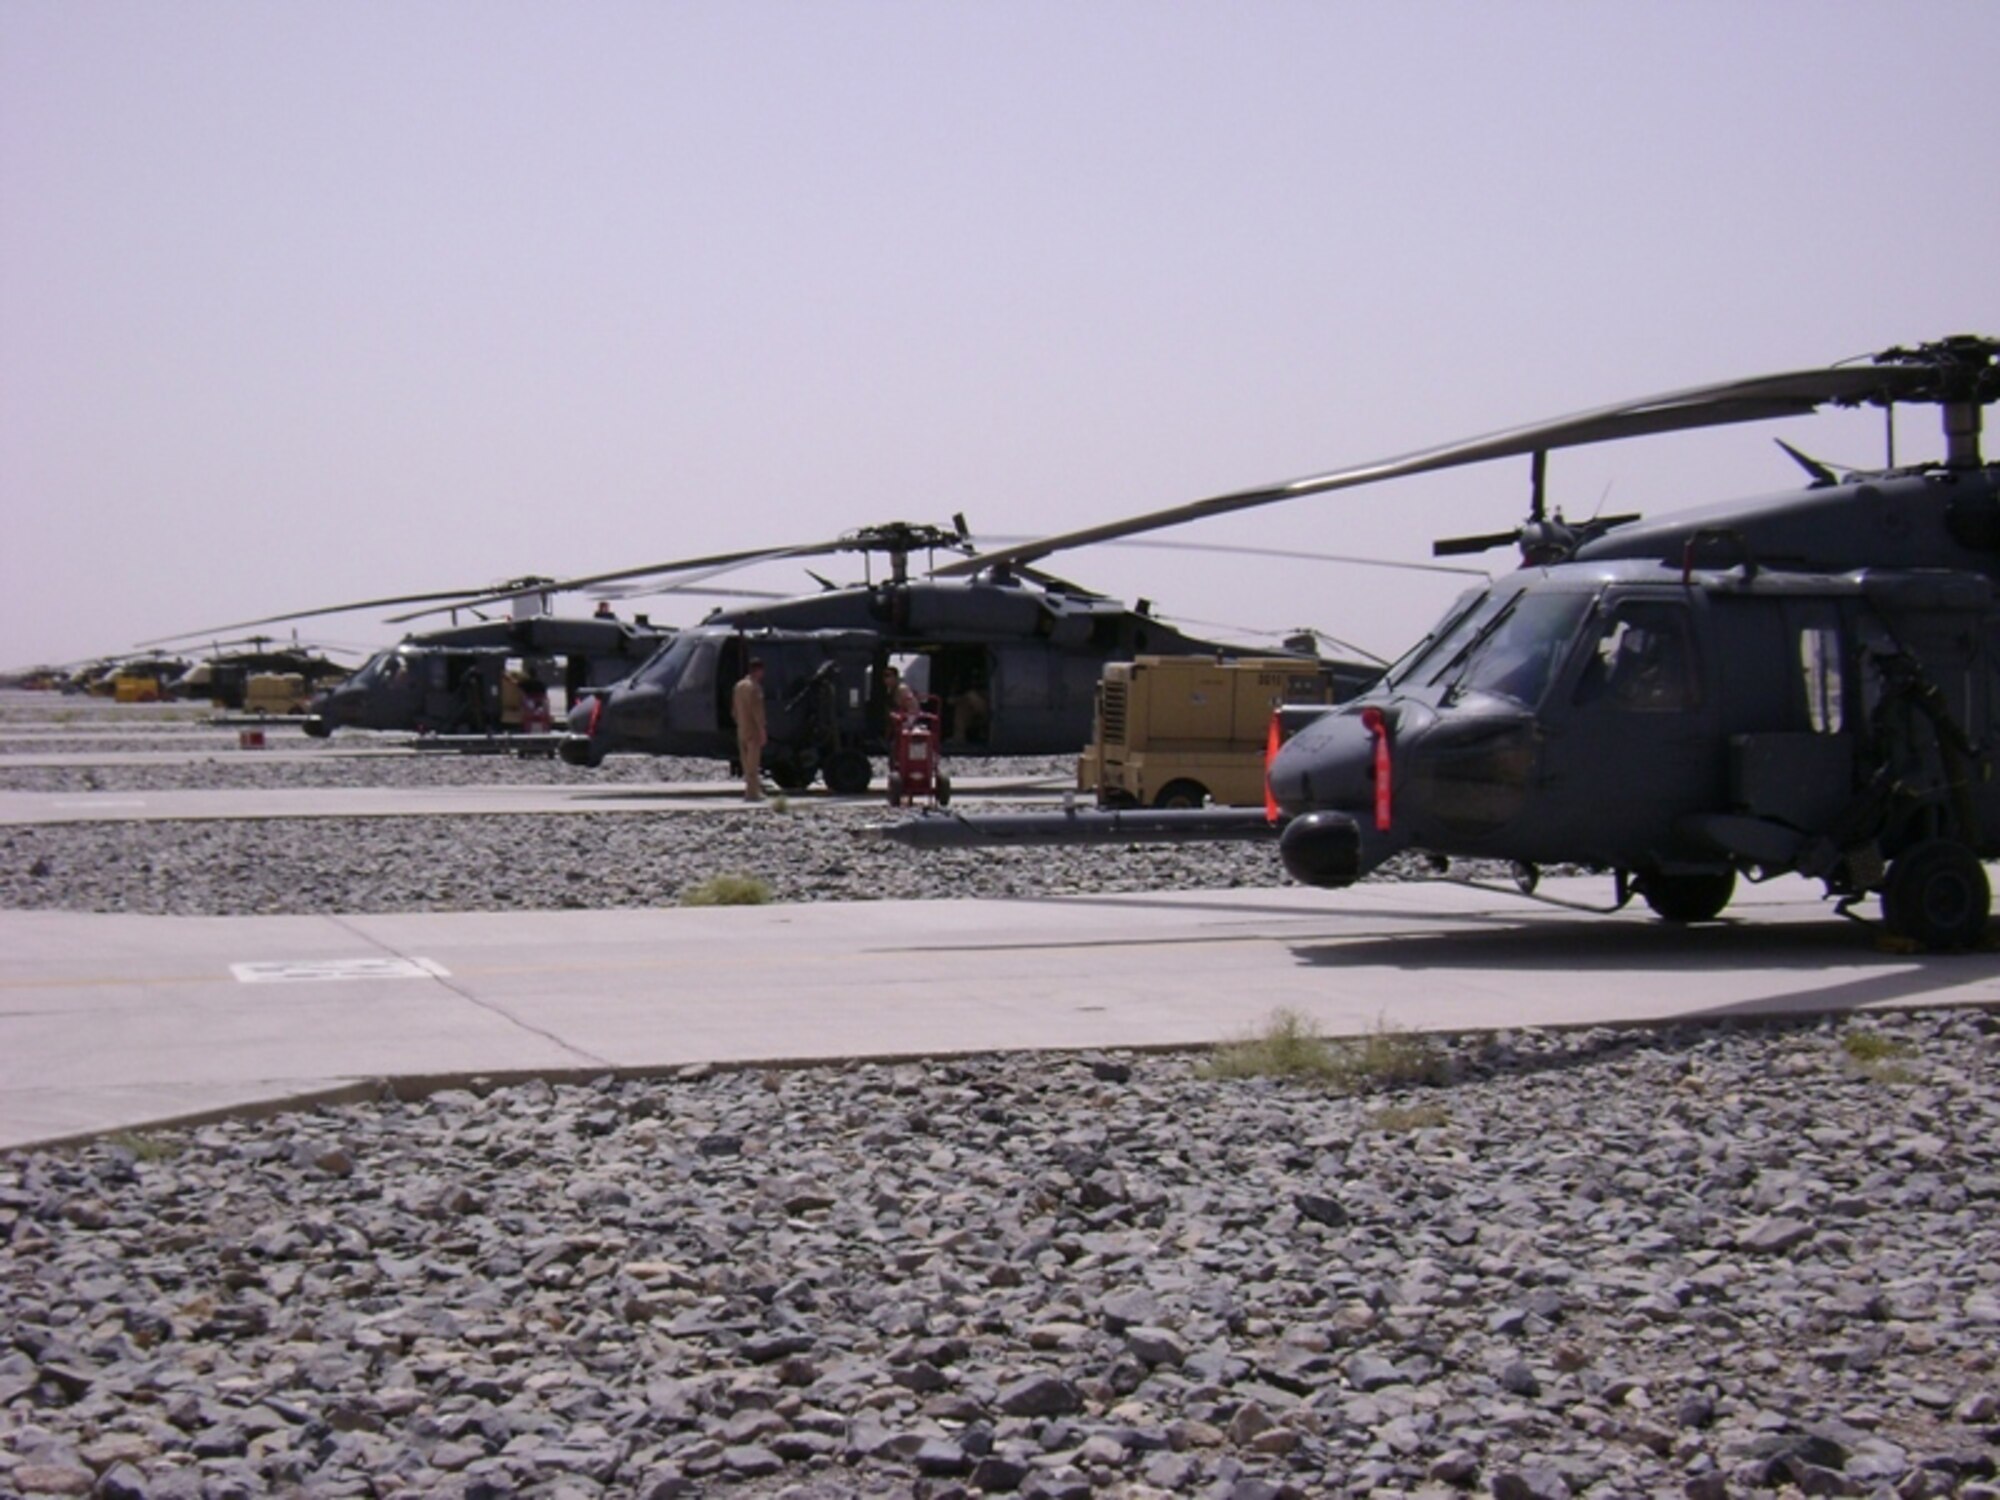 Three 33rd Rescue Squadron HH-60 Pave Hawks await mission taskings at Kandahar, Afghanistan.  The 33rd RQS from Kadena Air Base, Japan, deployed the end of July to Kandahar to conduct combat search and rescue and medical rescue missions in support of Operation Enduring Freedom. The squadron headed back to Afghanistan after returning from a four-month deployment to Kandahar in May.  U.S. Air Force photo